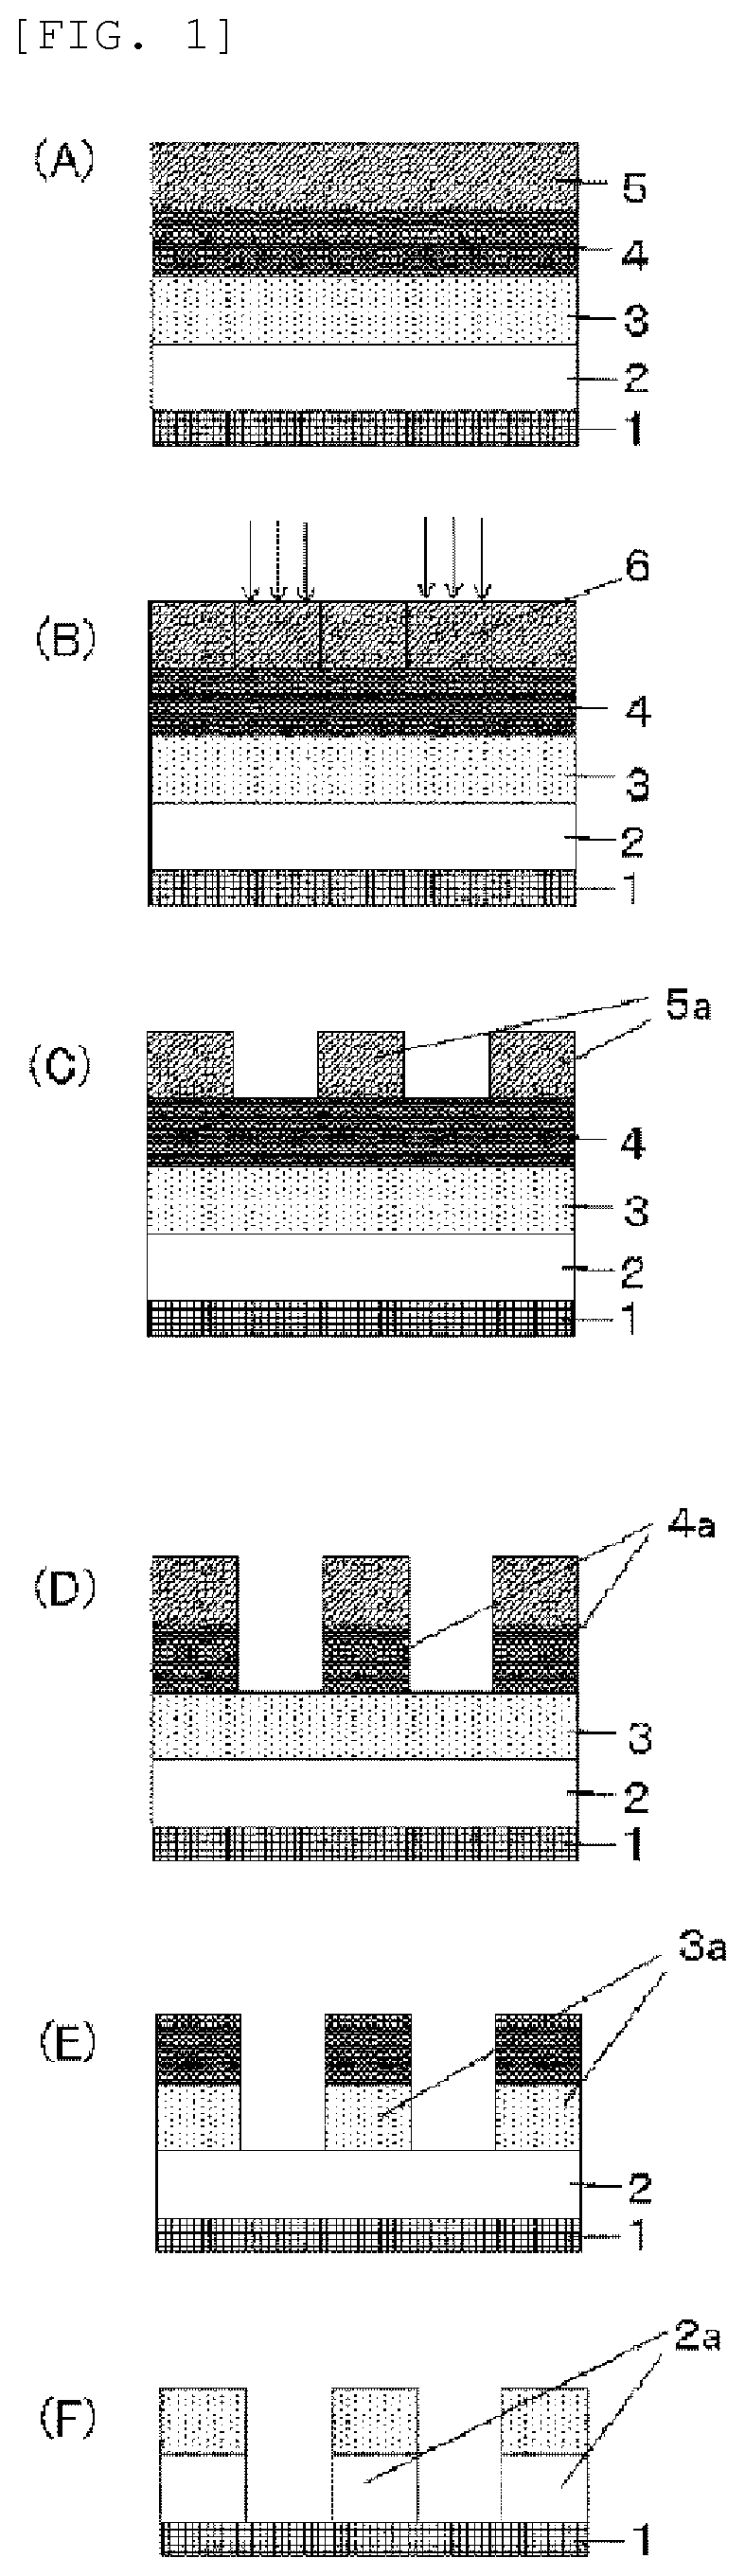 Material for forming organic film, method for forming organic film, patterning process, and compound